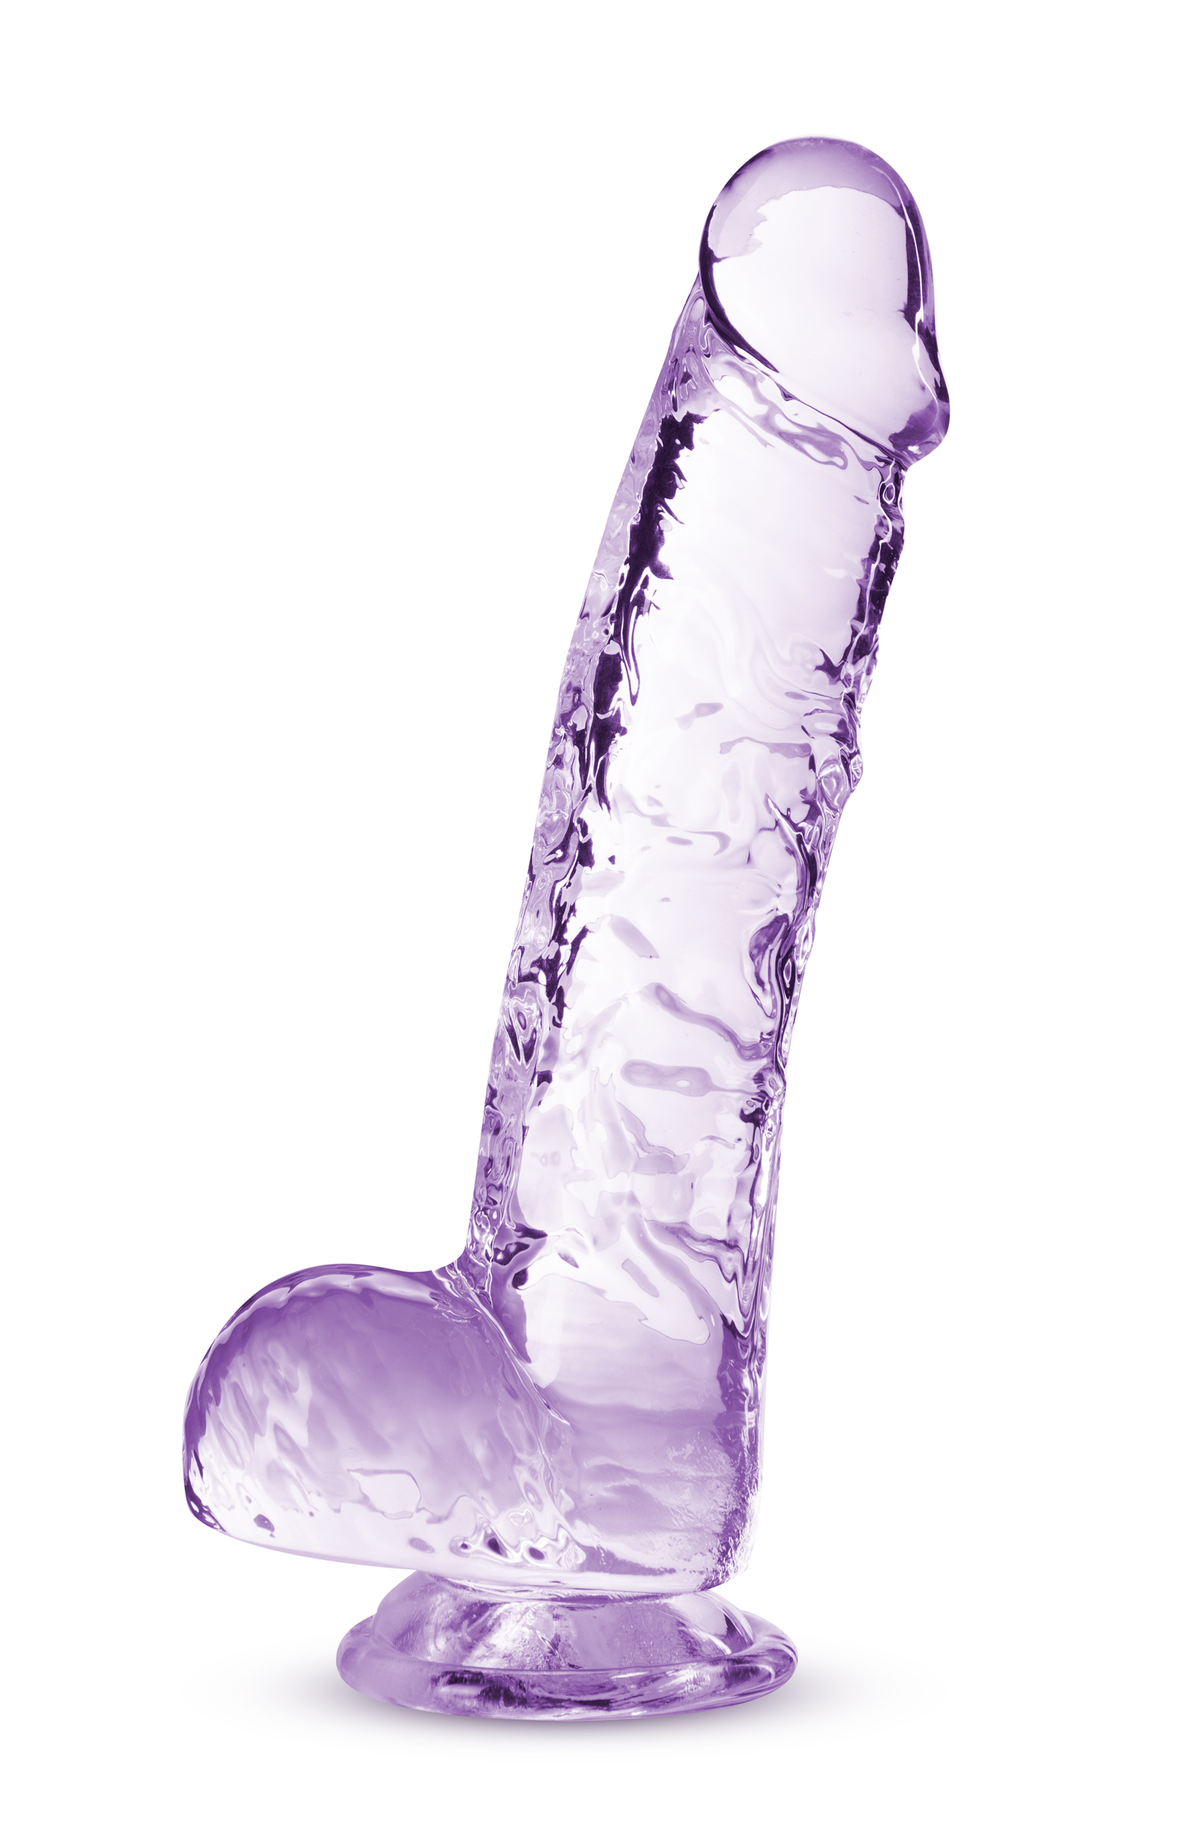 naturally yours 6 inch crystalline dildo amethyst